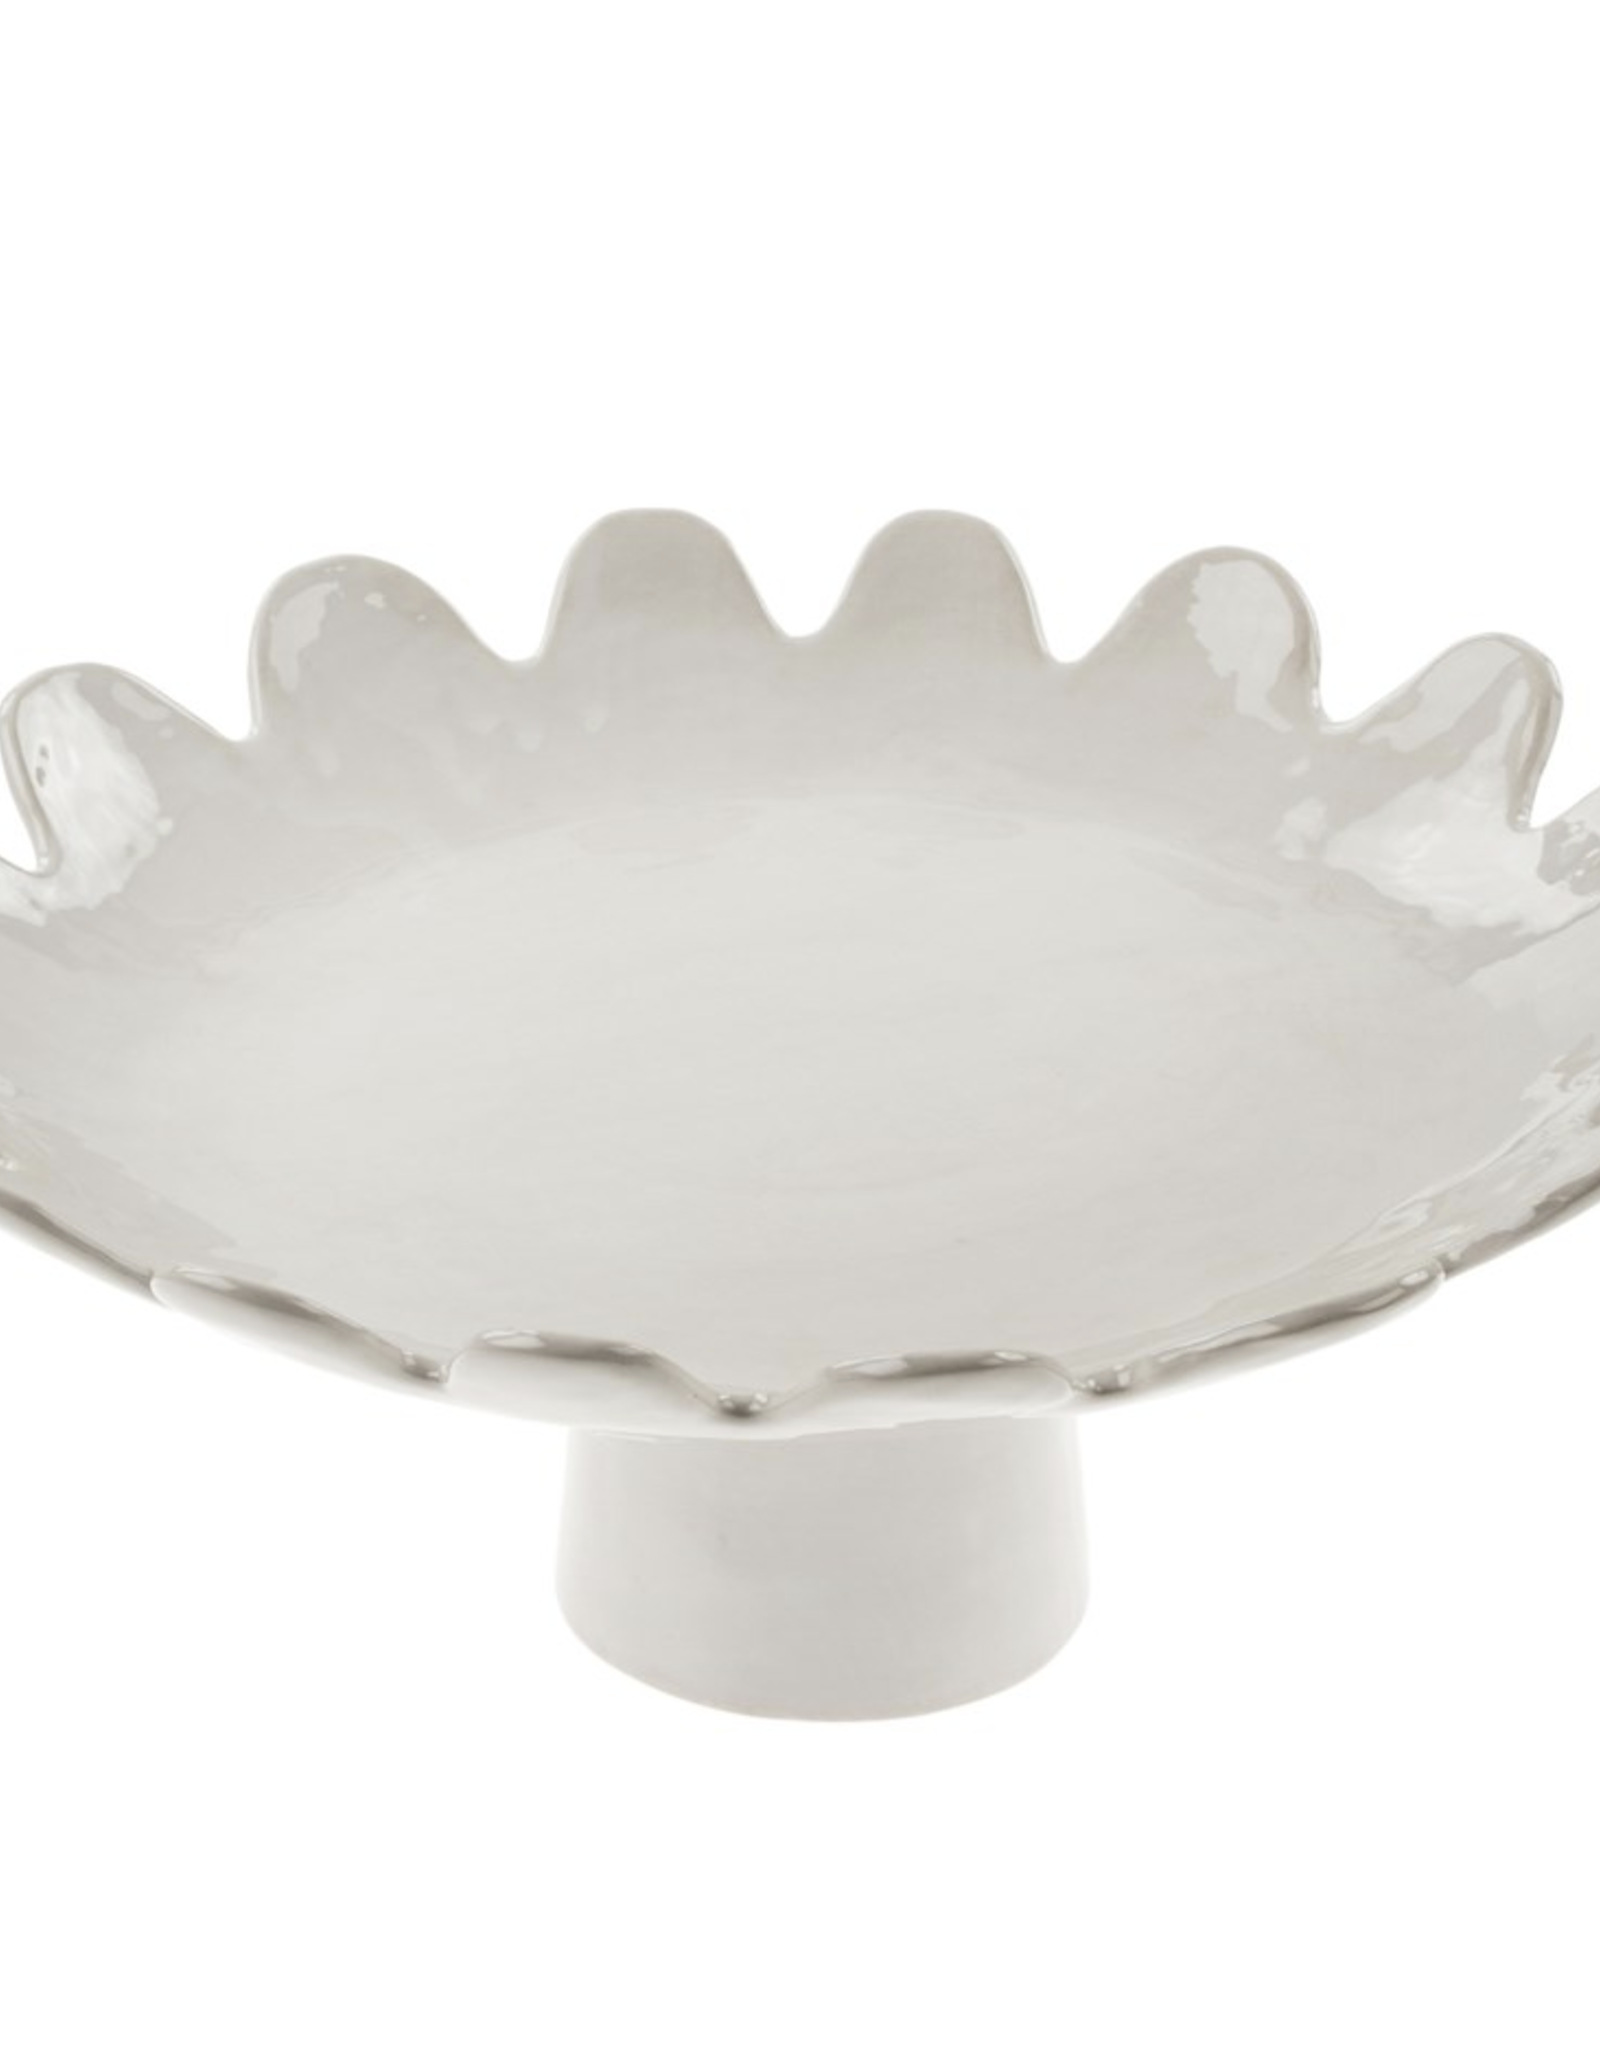 Scalloped Cake Stand D13.5" H5.75"